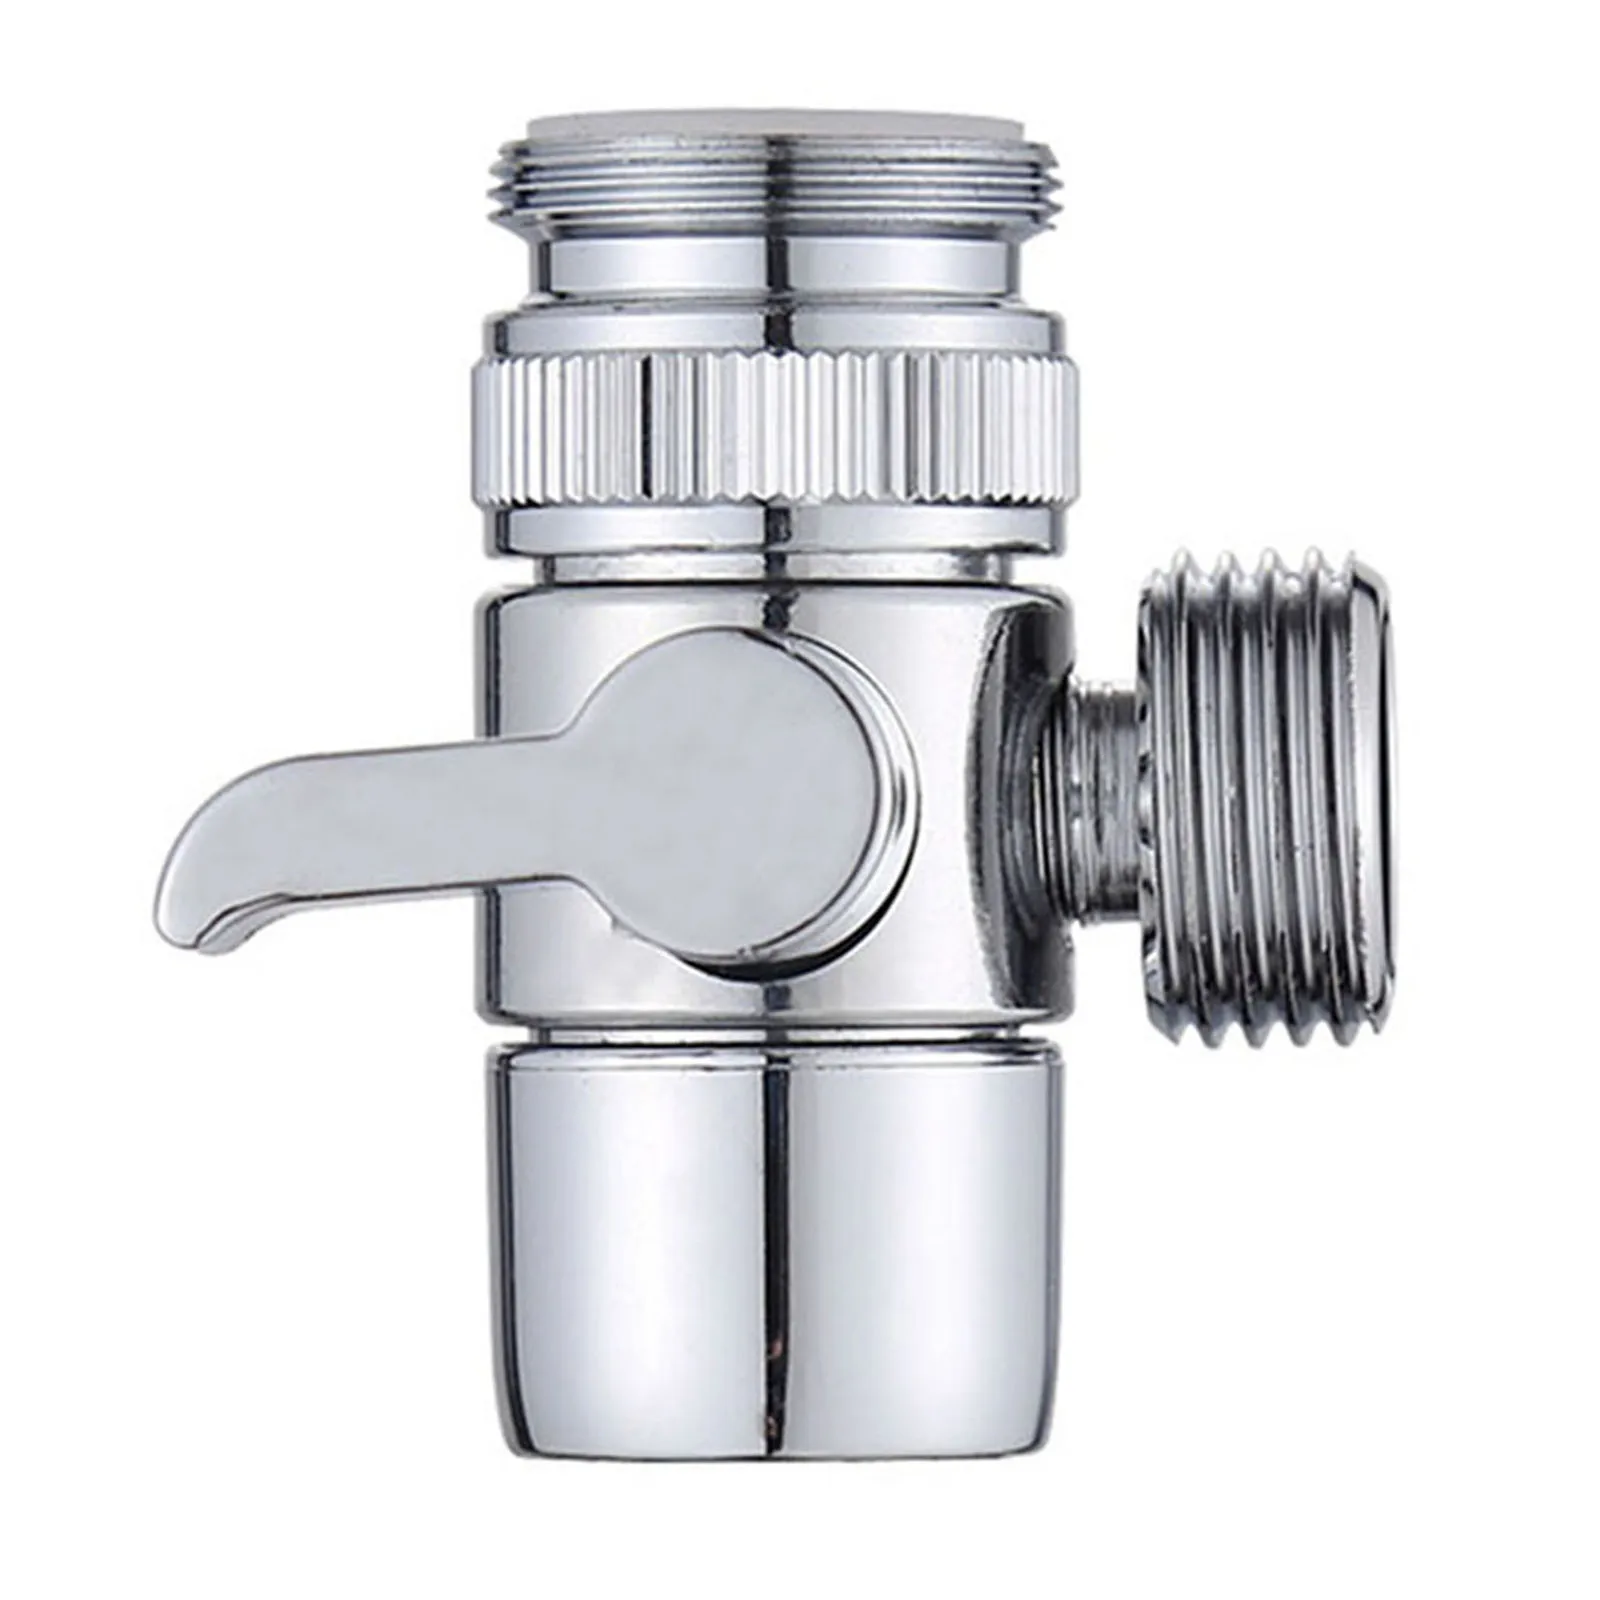 

Kitchen Bathroom Sink Faucets Diverter Valve Connection Faucet Three-way Splitter One-in-two-out Joint Water Pipe Fittings Thick